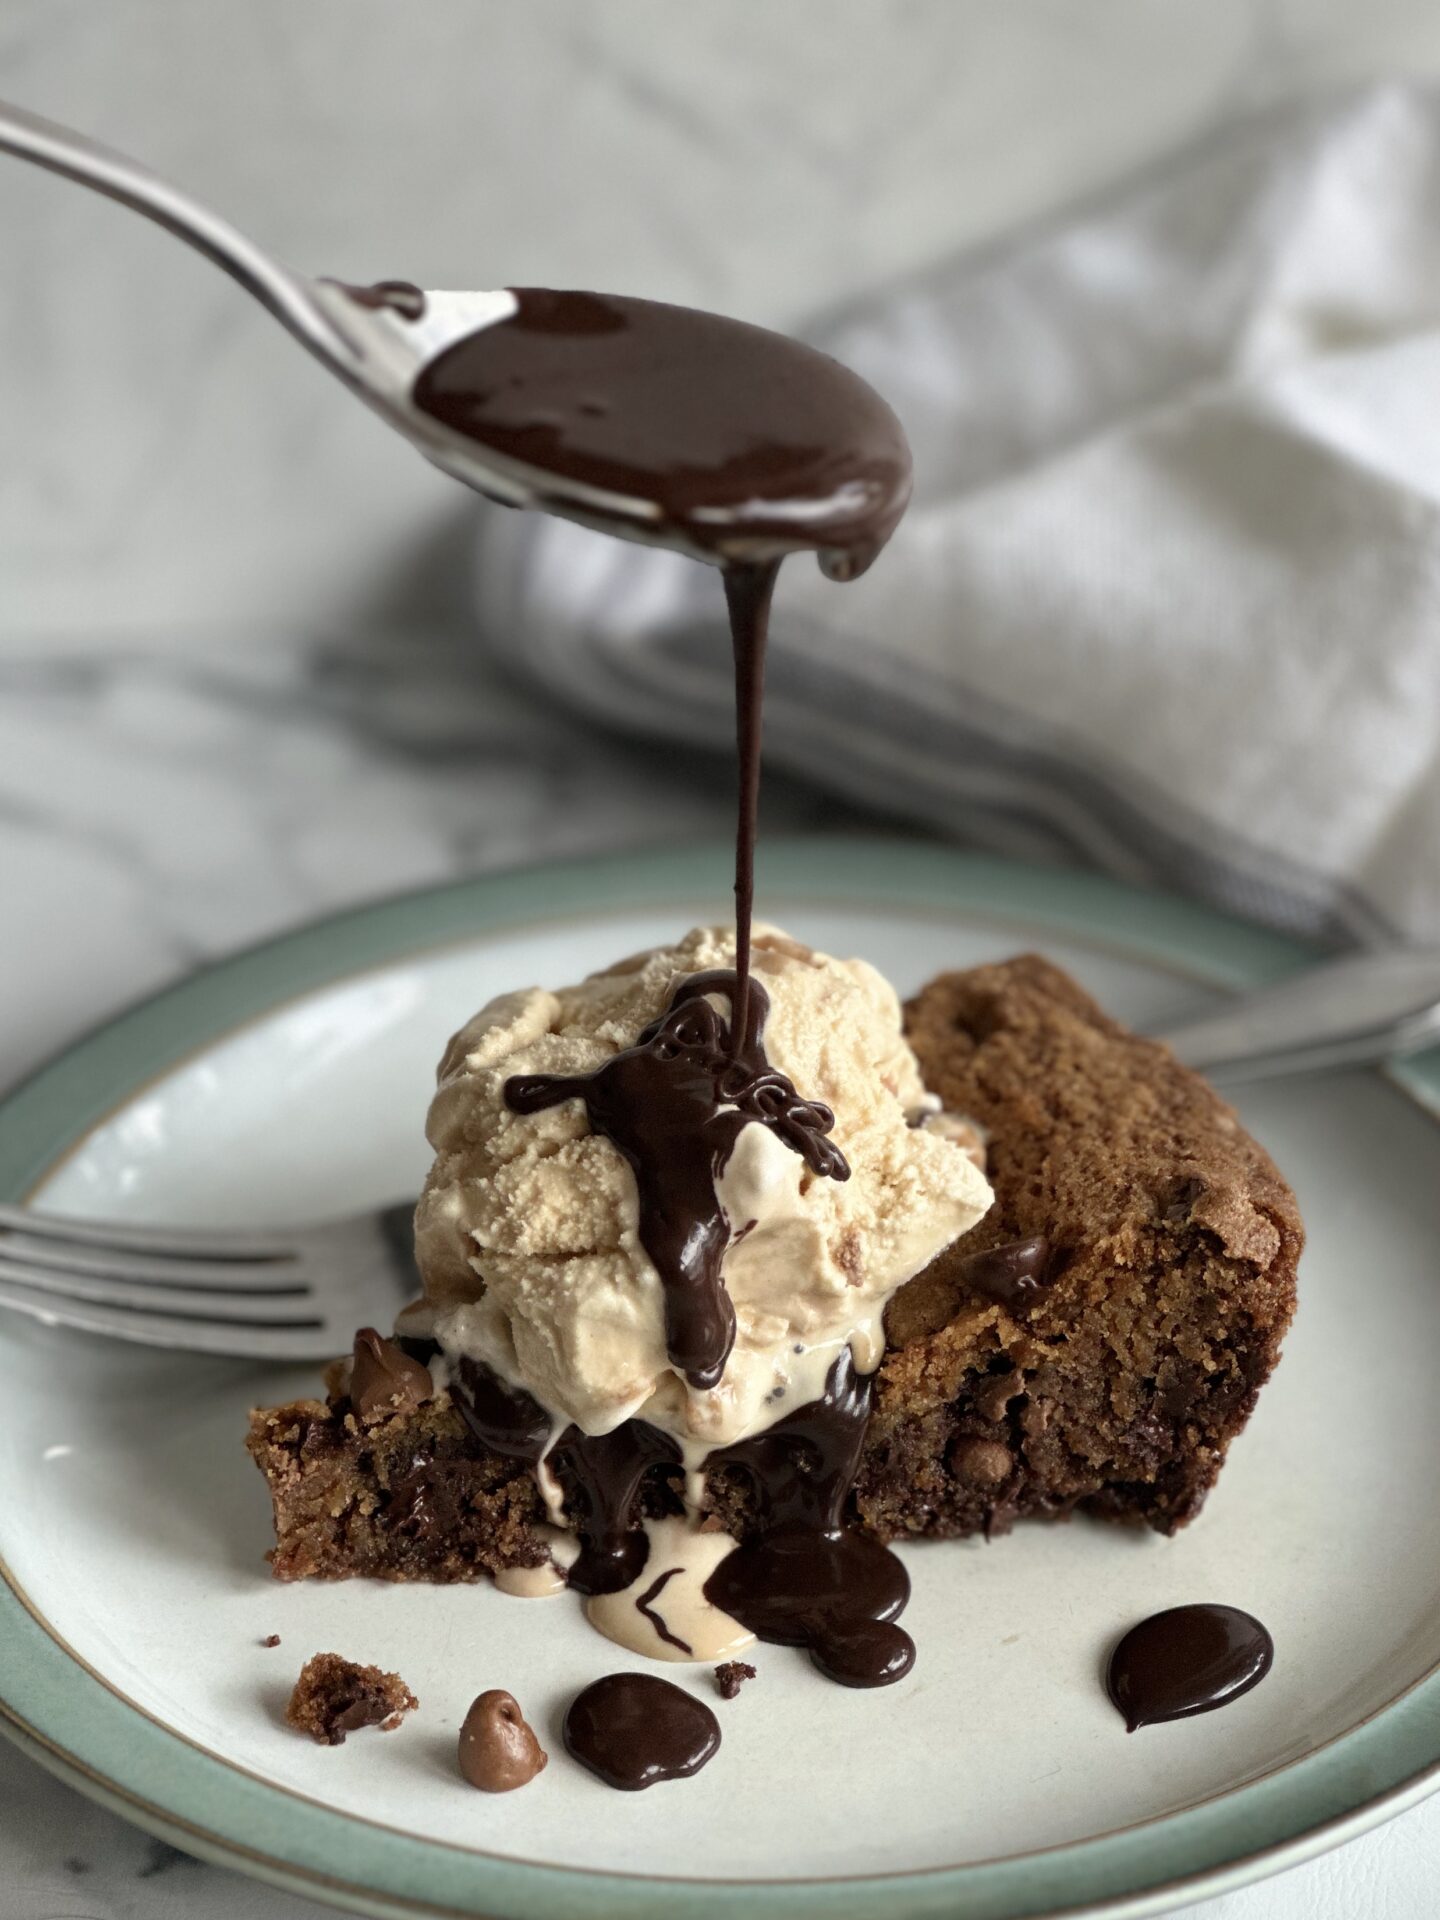 Hot Fudge sauce being spooned over cake and ice cream